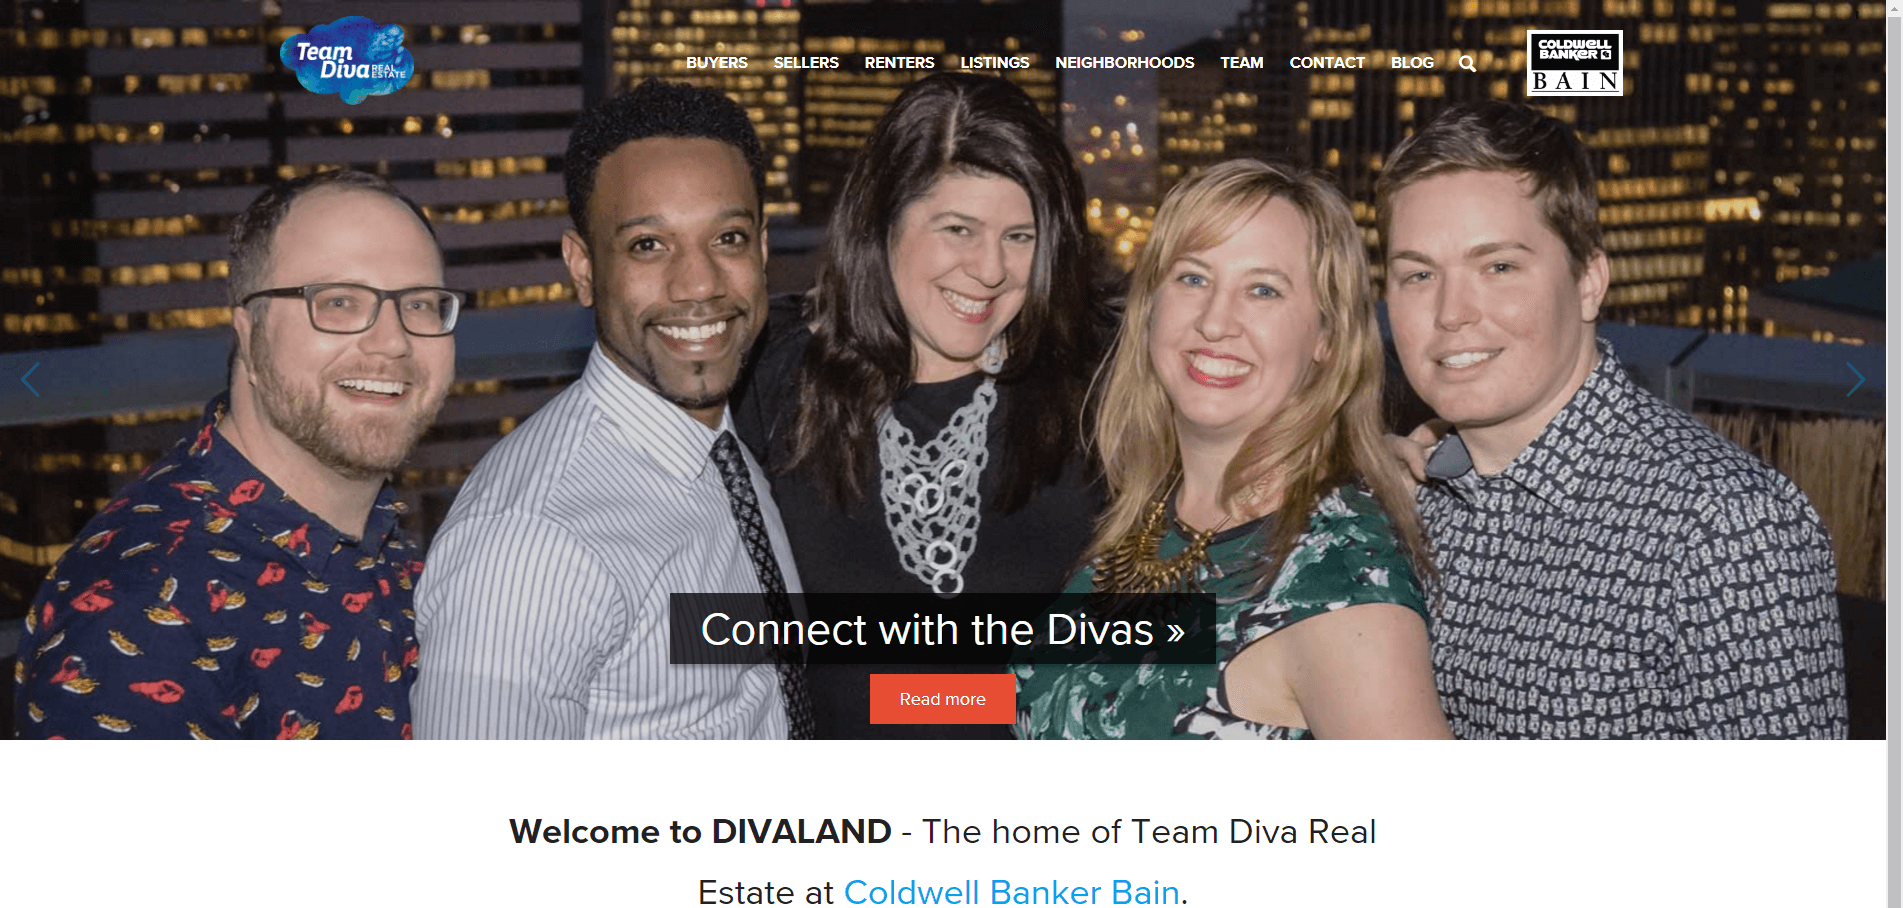  WOW!  We listed 101 of the best real estate websites.  We reviewed each site and ranked them 1-101.  Here's teamdivarealestate.com.  Want to see who made the cut? 